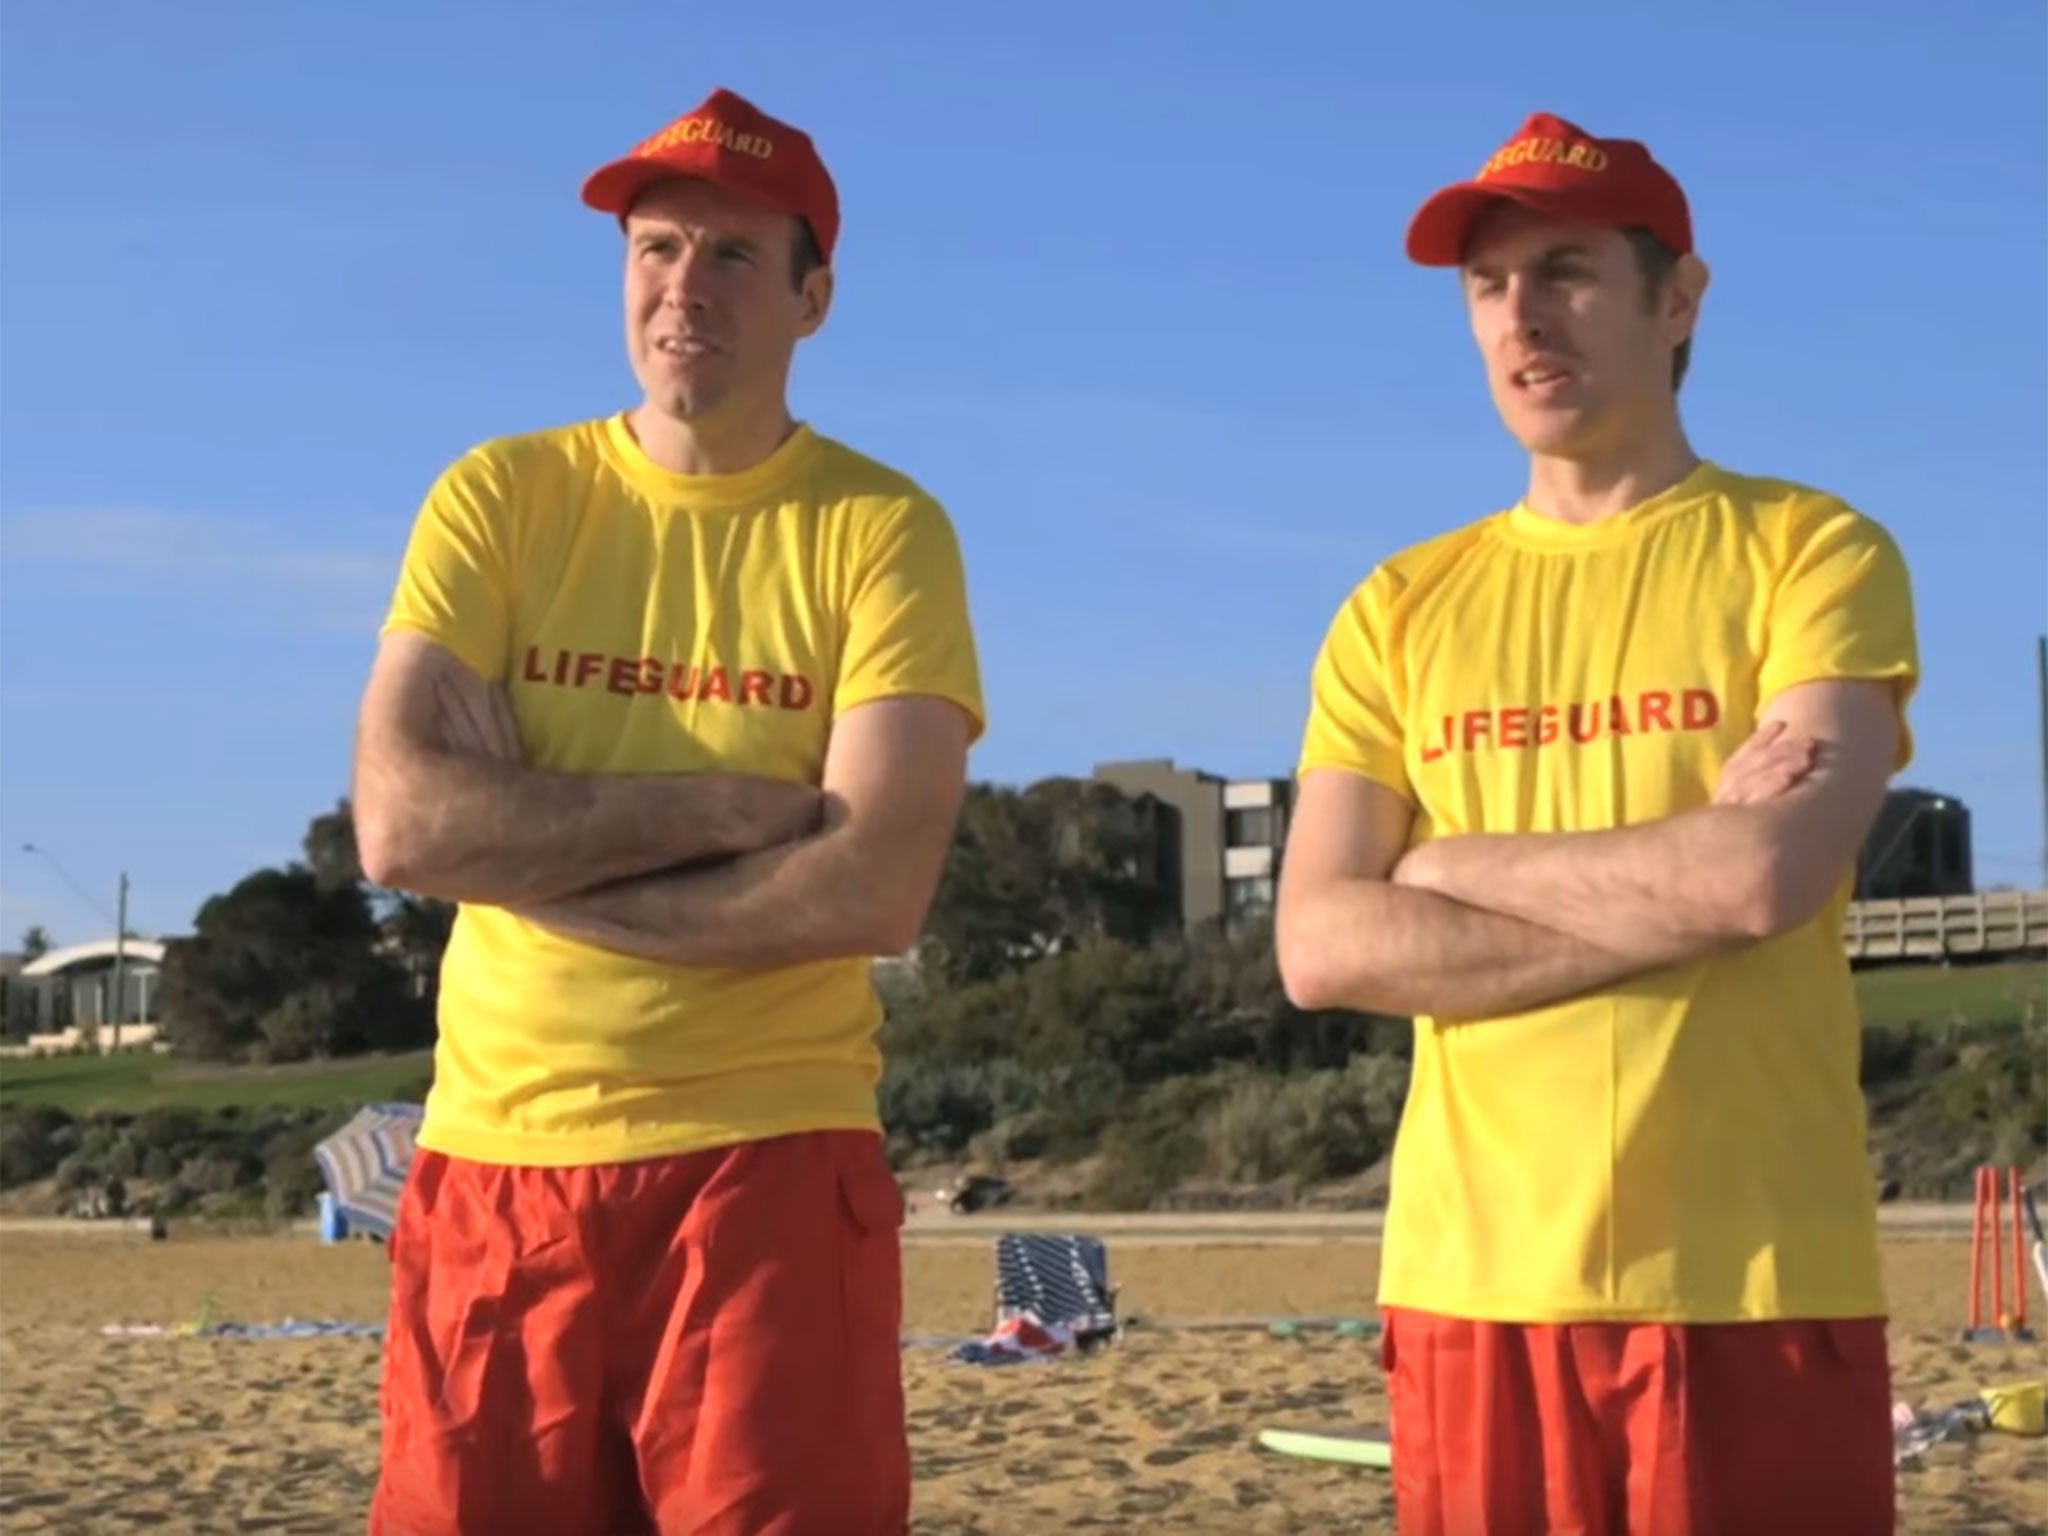 The lifeguards featured in Outstralia's campaign.